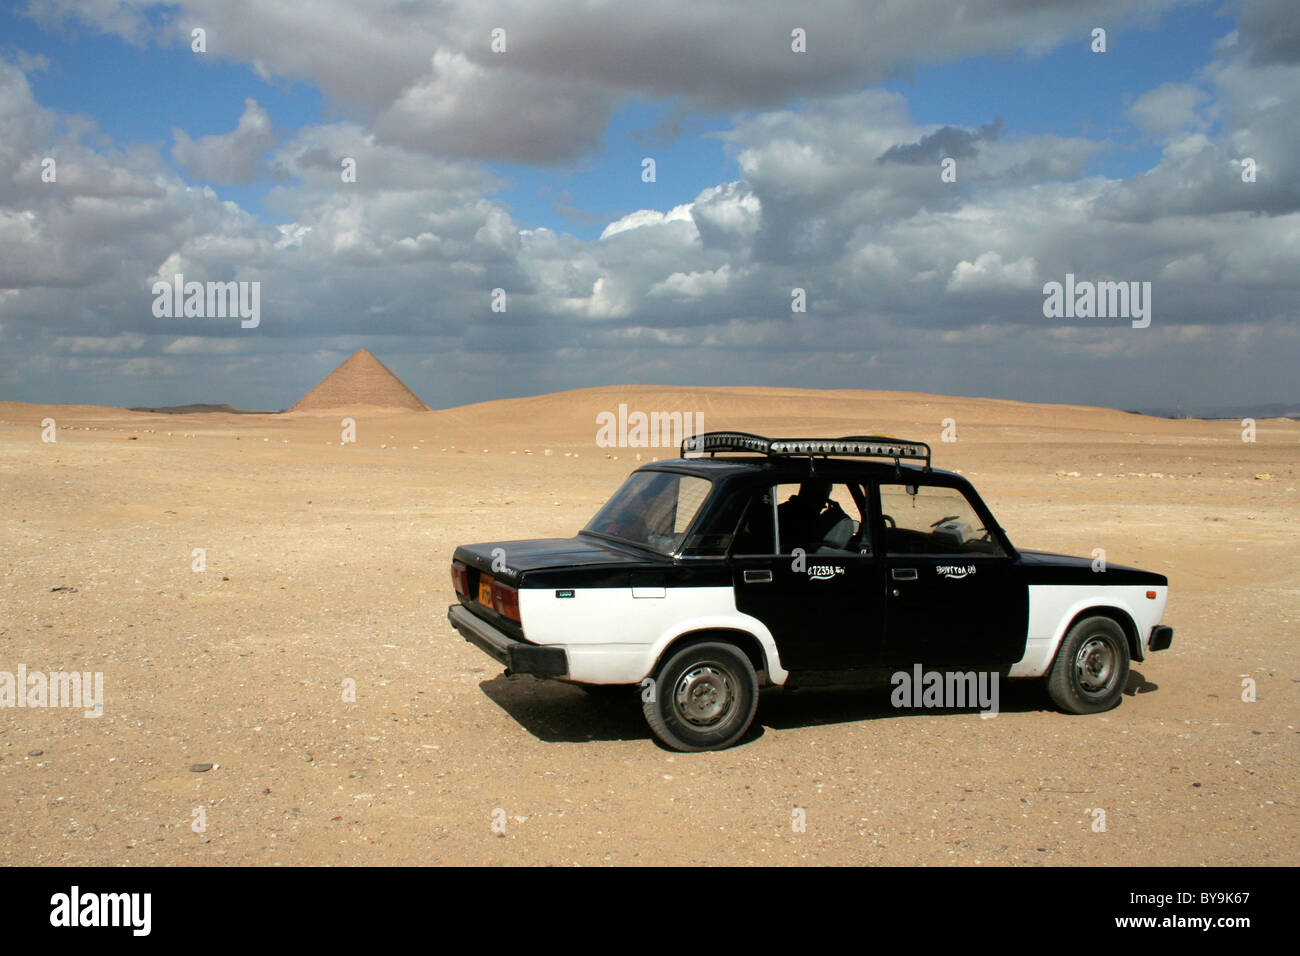 A black and white Egyptian taxi waiting in the desert with the Red Pyramid in the background near Cairo Stock Photo